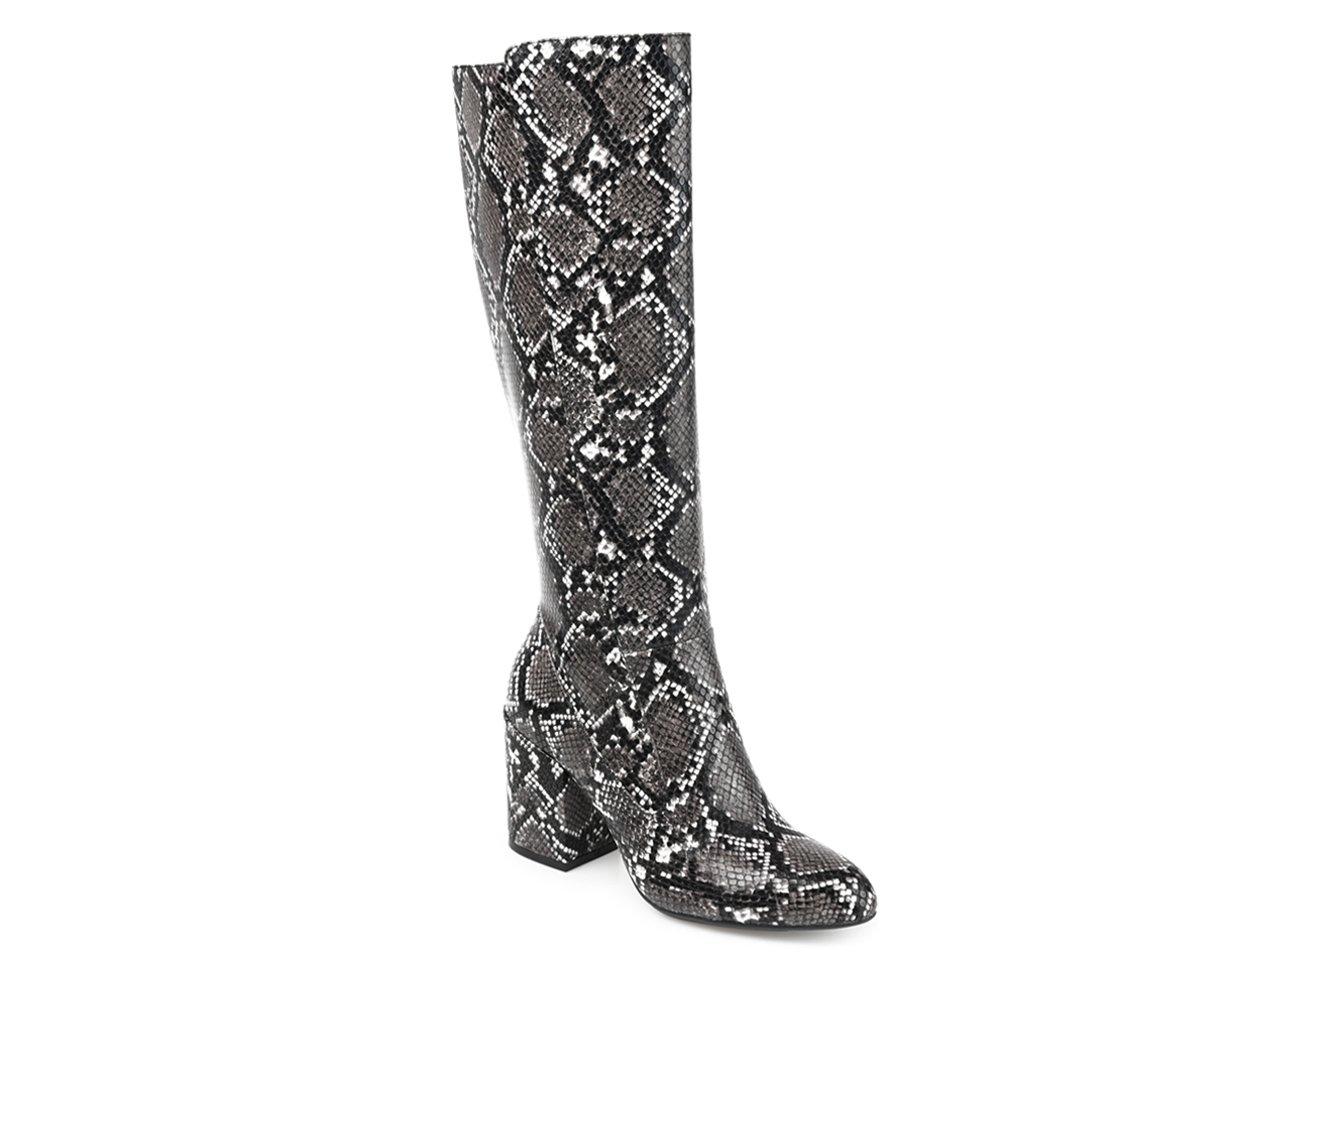 Women's Journee Collection Tavia Extra Wide Calf Knee High Boots